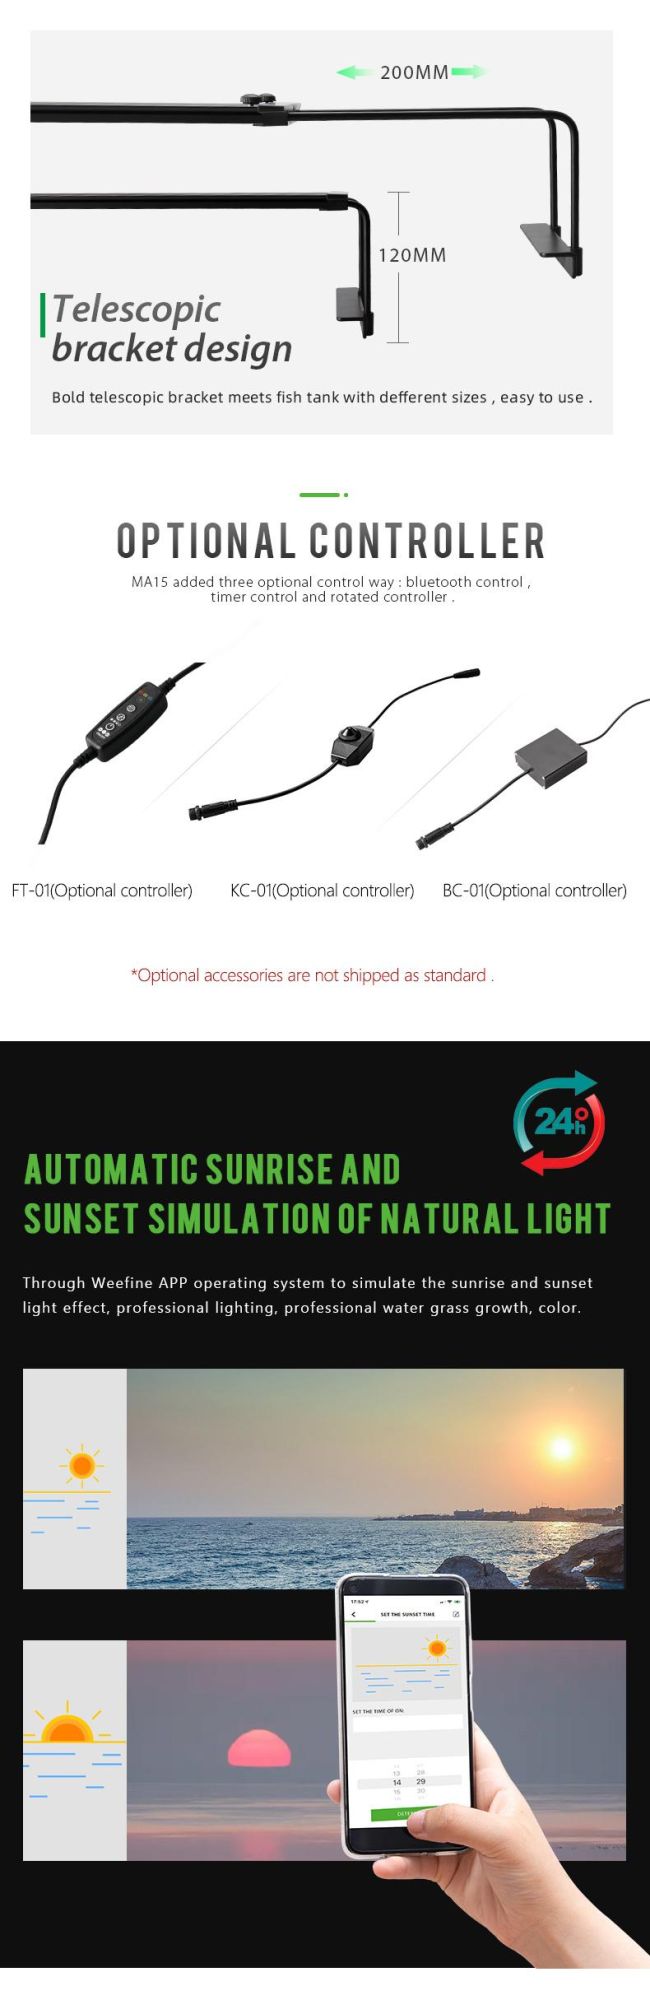 Programmable LED Aquarium Light for Coral Reef with Sunset and Sunrise Mode (MA15)